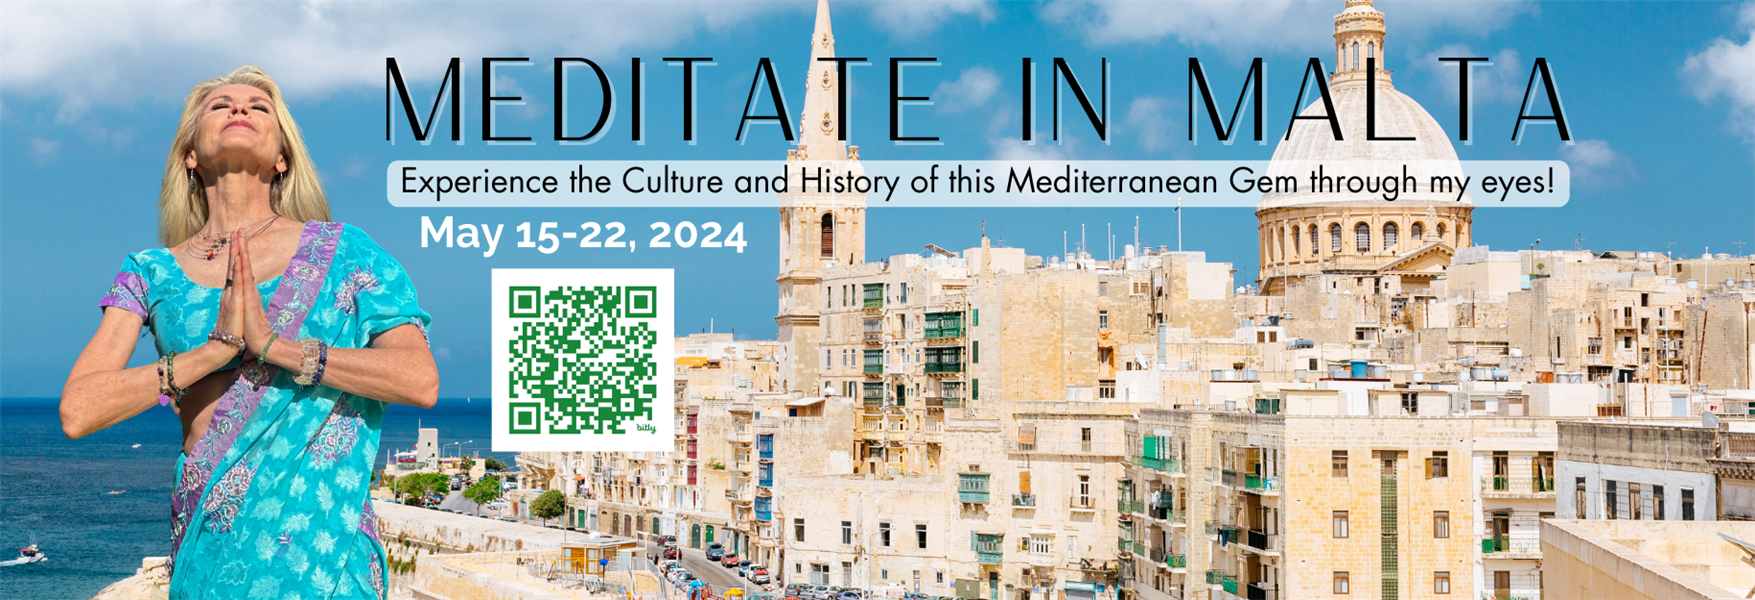 4aa18ba2-b5a1-48df-9b47-7f60b05341b8_Meditate in Malta with Lisa facebook cover.png